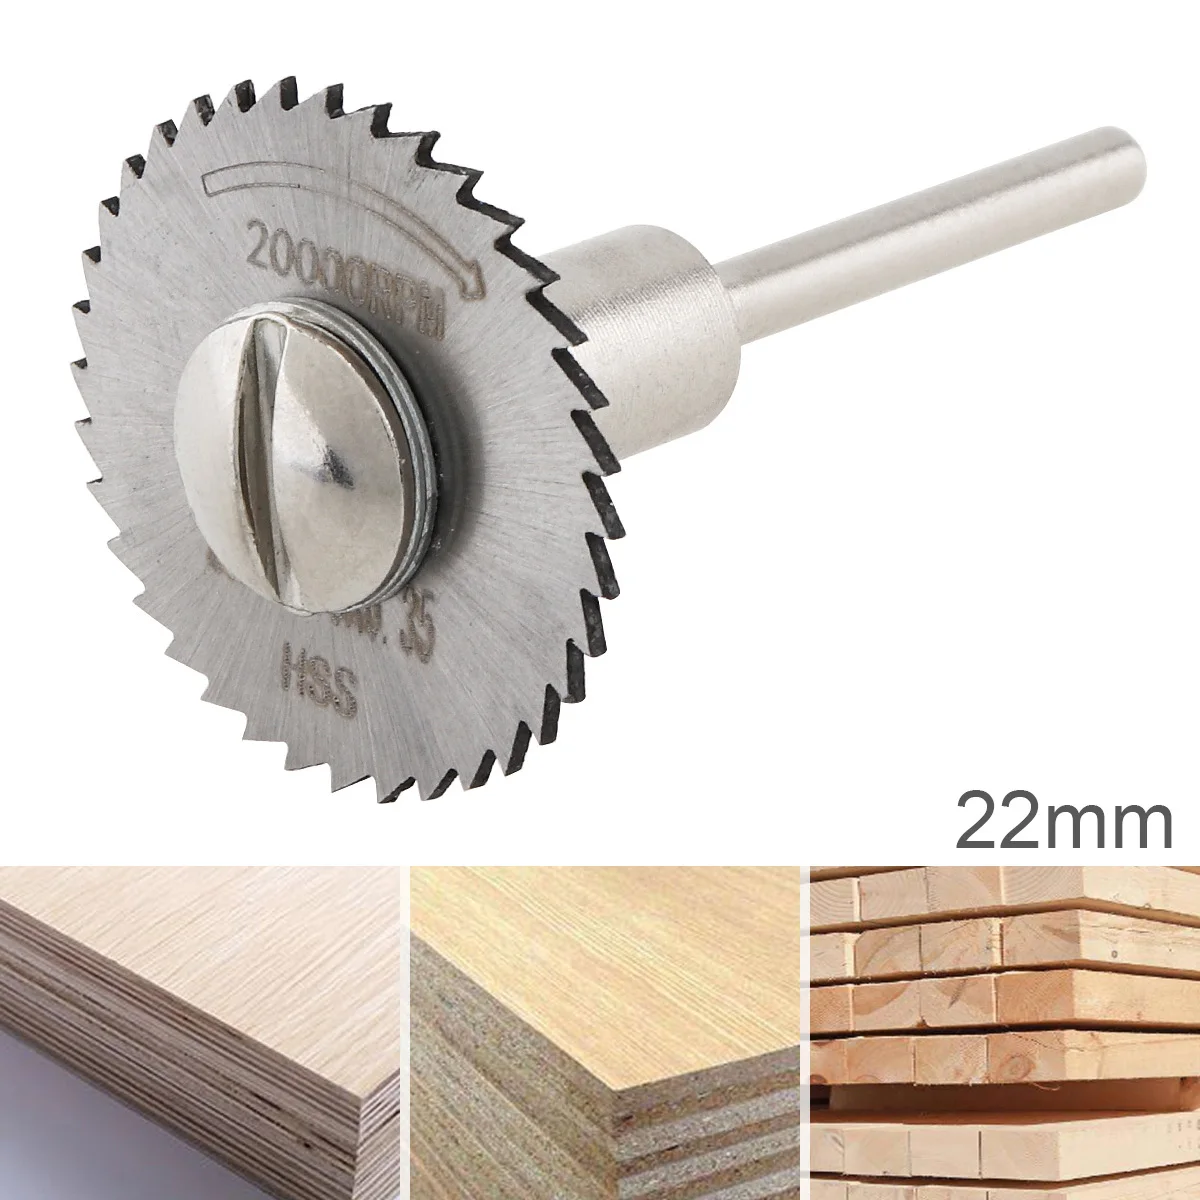 

22mm 25mm 32mm HSS High Speed Steel Cutting Tool Mandrel Disc Blade Mini Circular Saw Blade with Connecting Rod